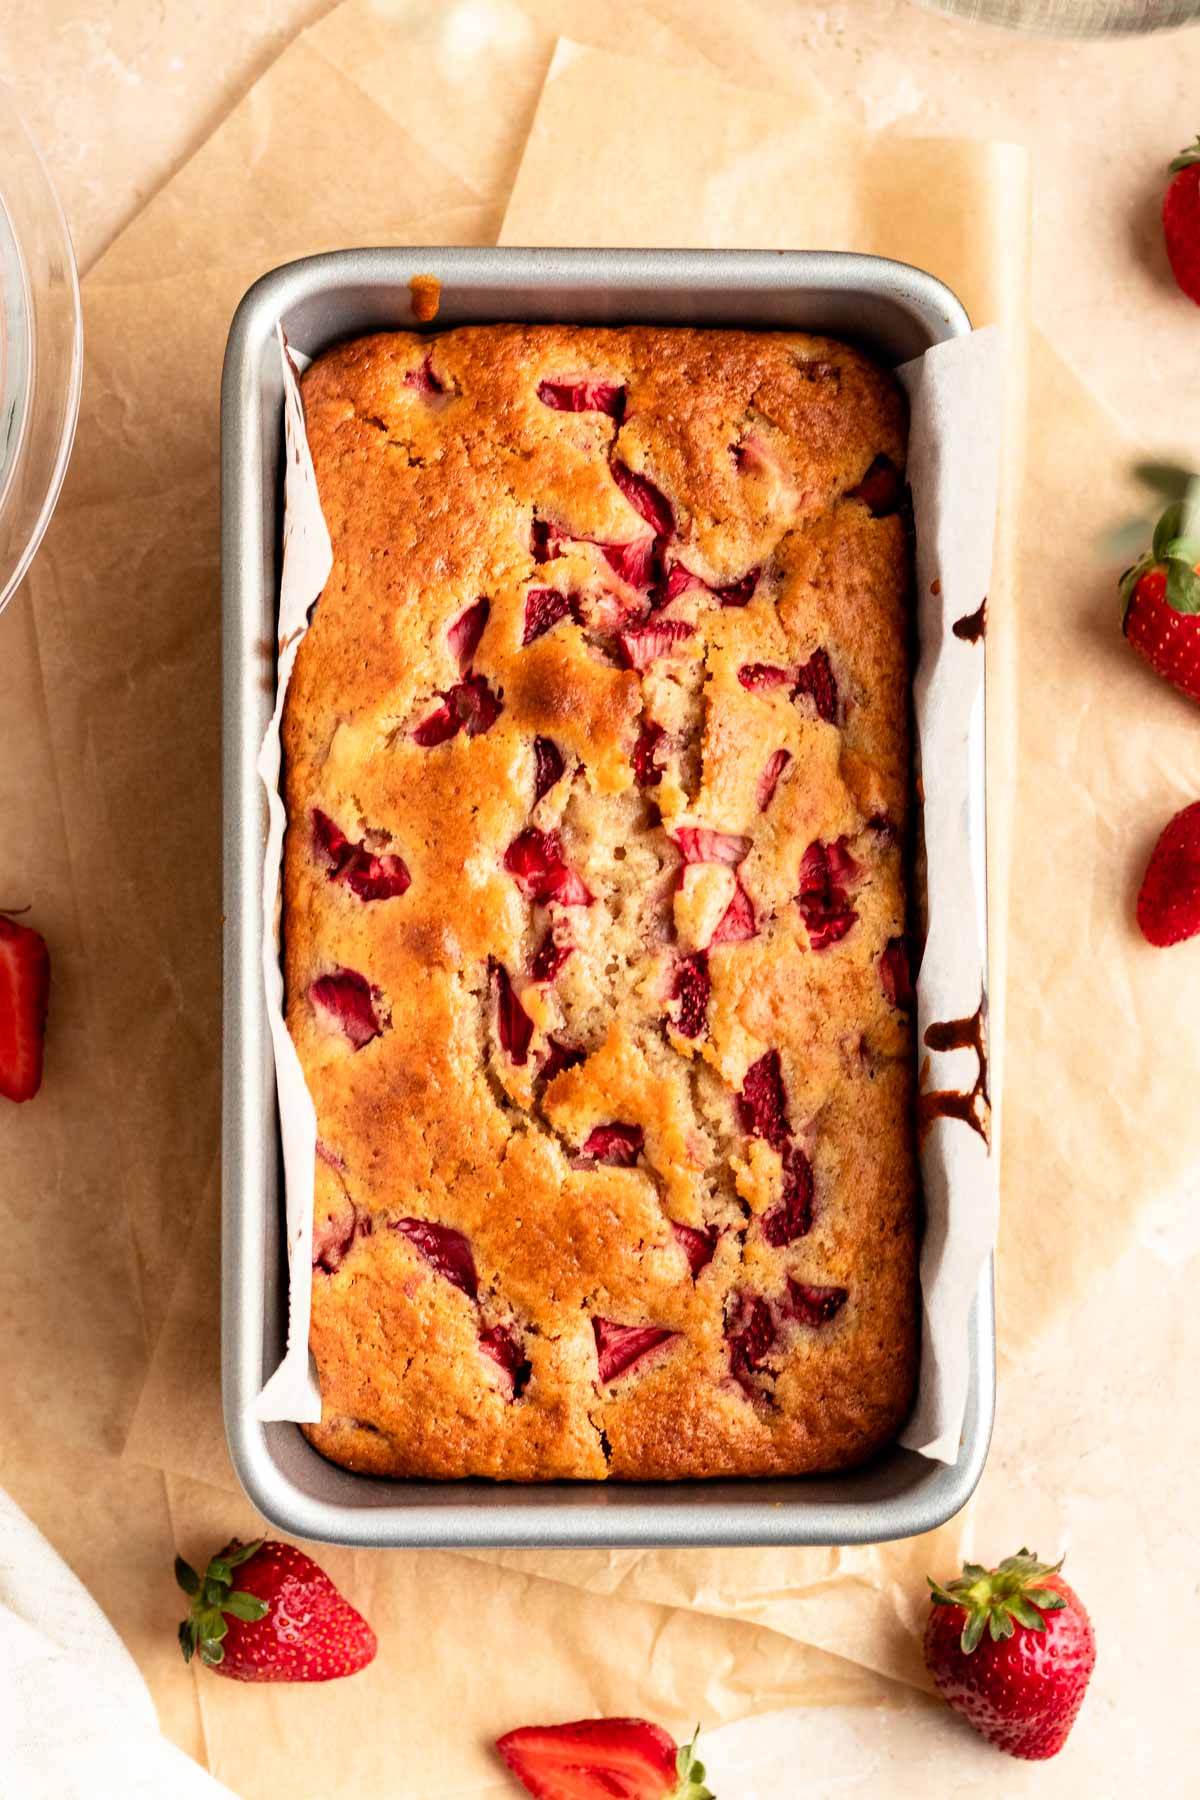 Baked strawberry loaf in a pan.